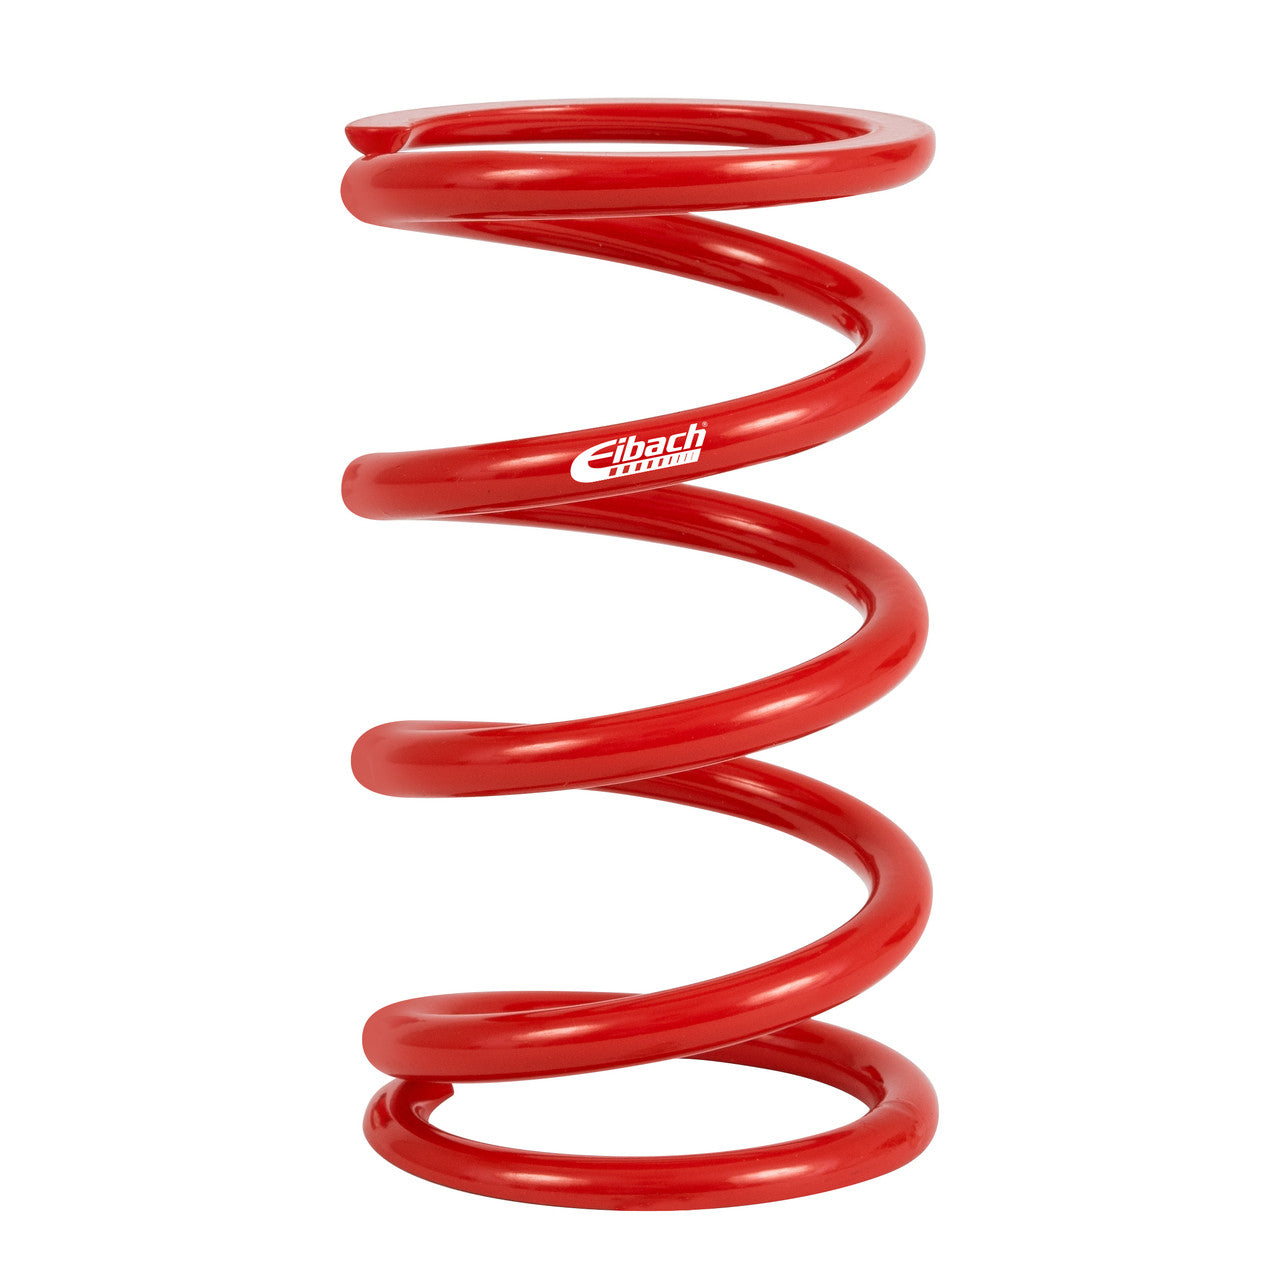 Eibach Metric Coilover Spring - 60MM I.D. 140-60-0150